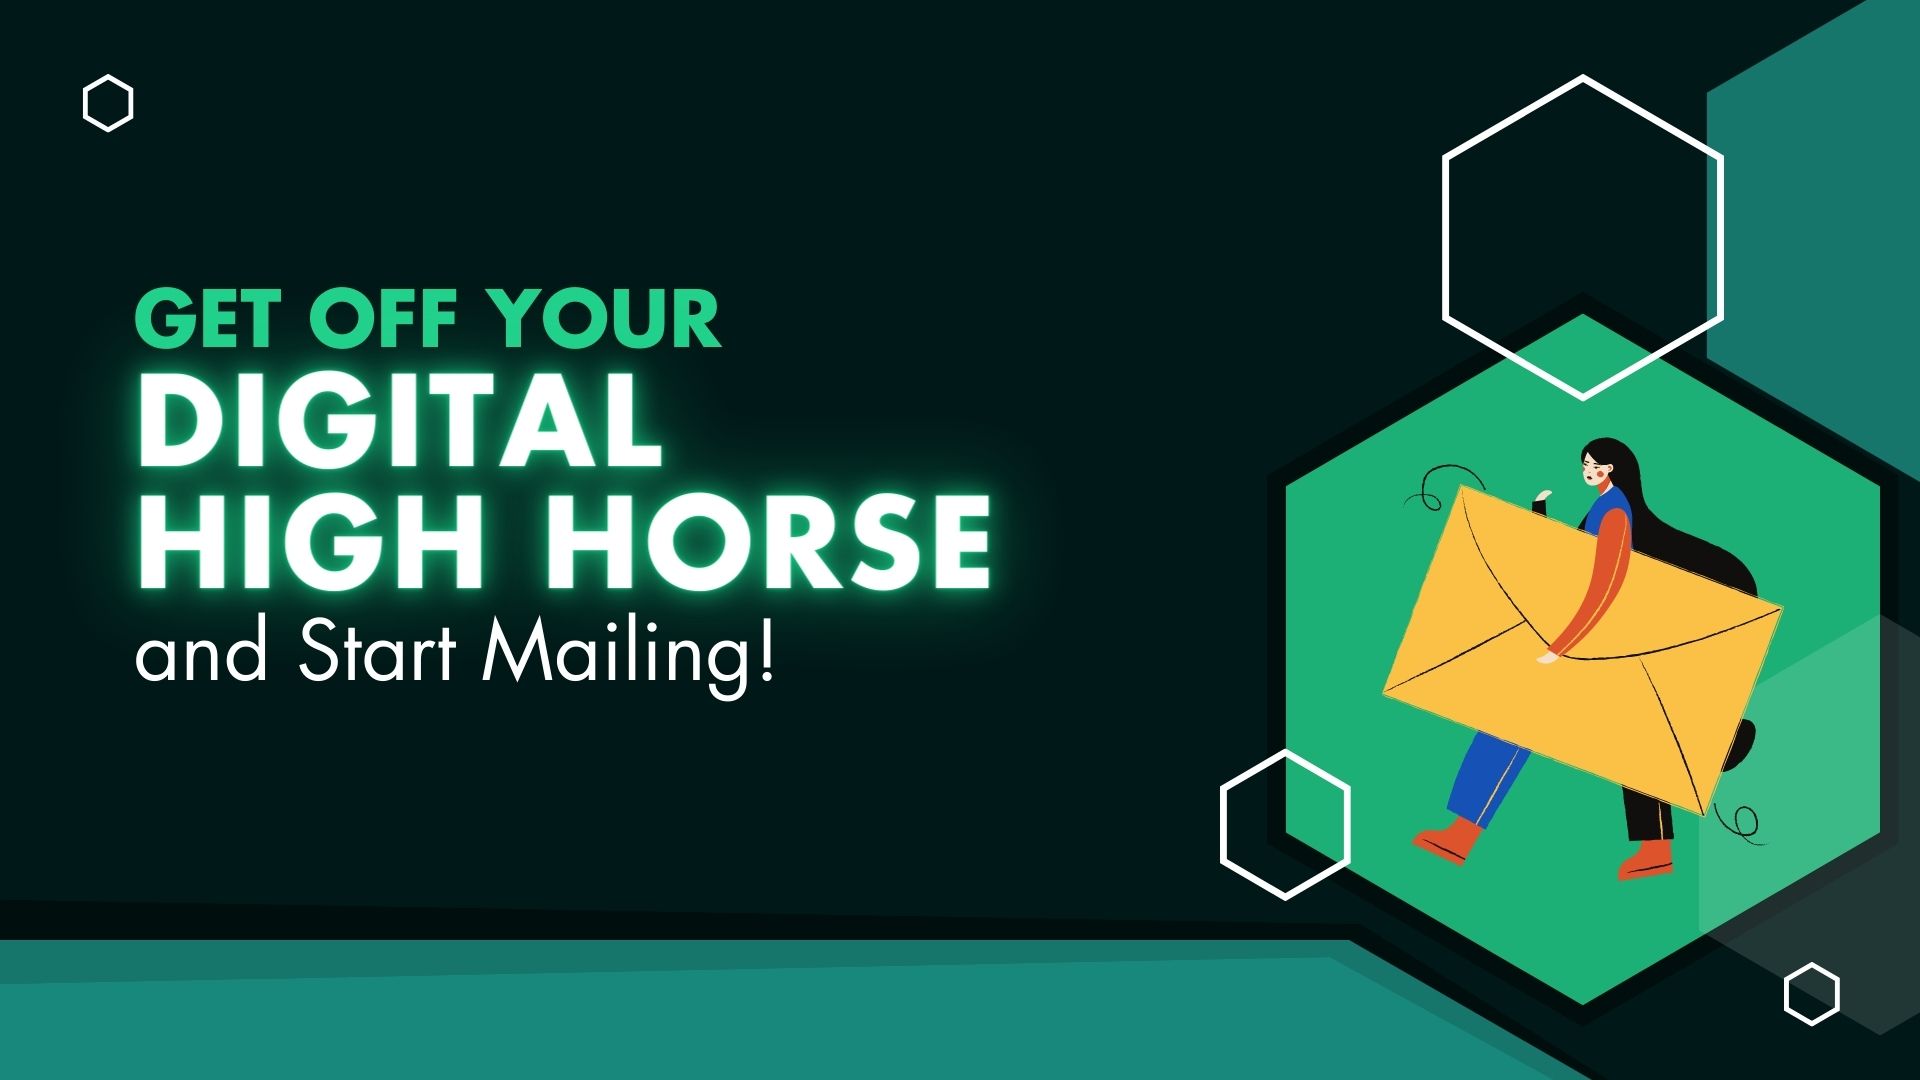 Get Off Your Digital High Horse and Start Mailing!